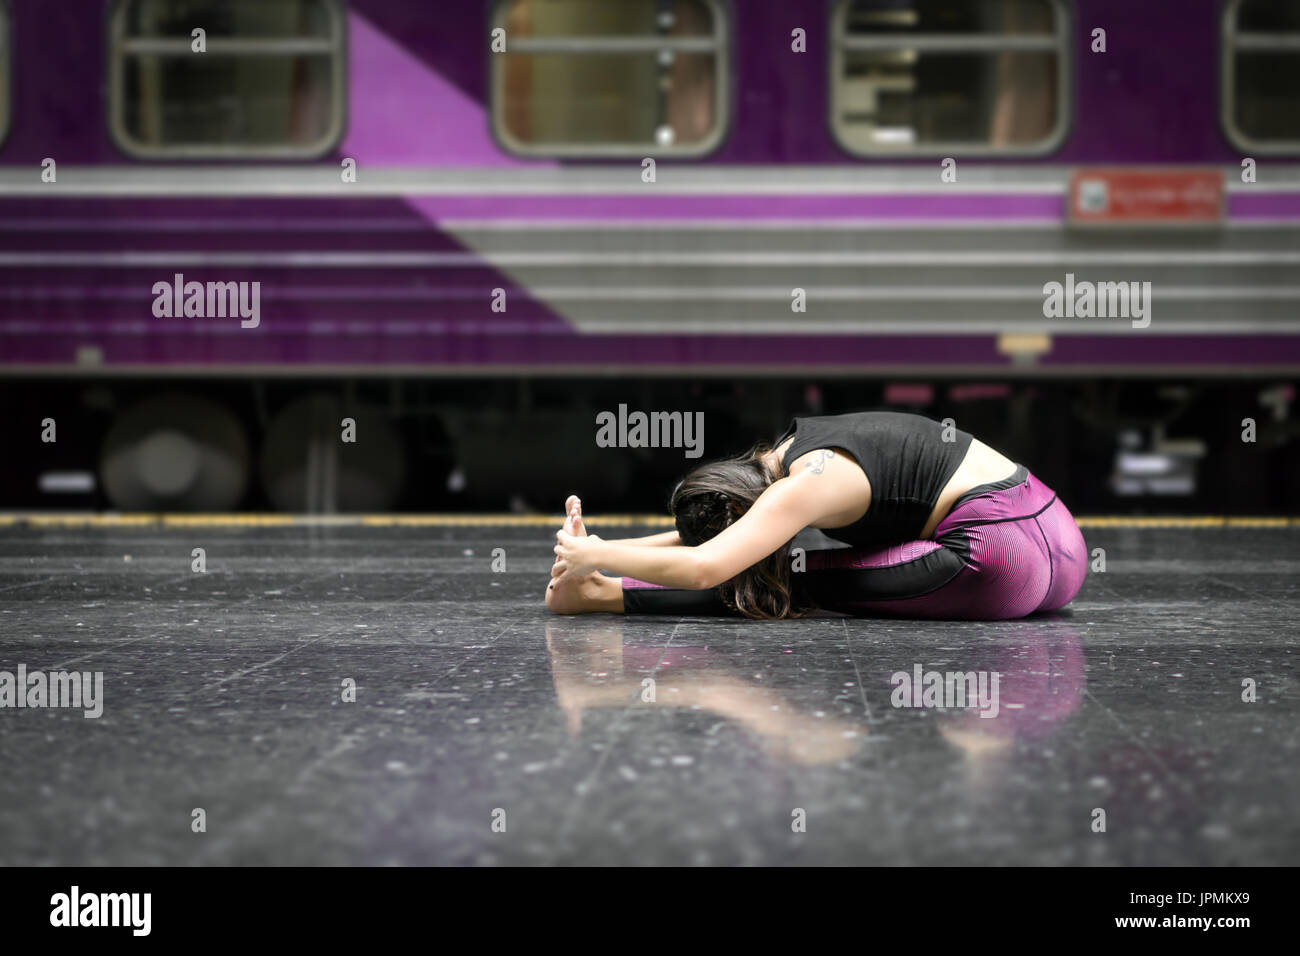 flexible girl doing yoga poses on the floor of the a train station wearing fitness clothes Stock Photo